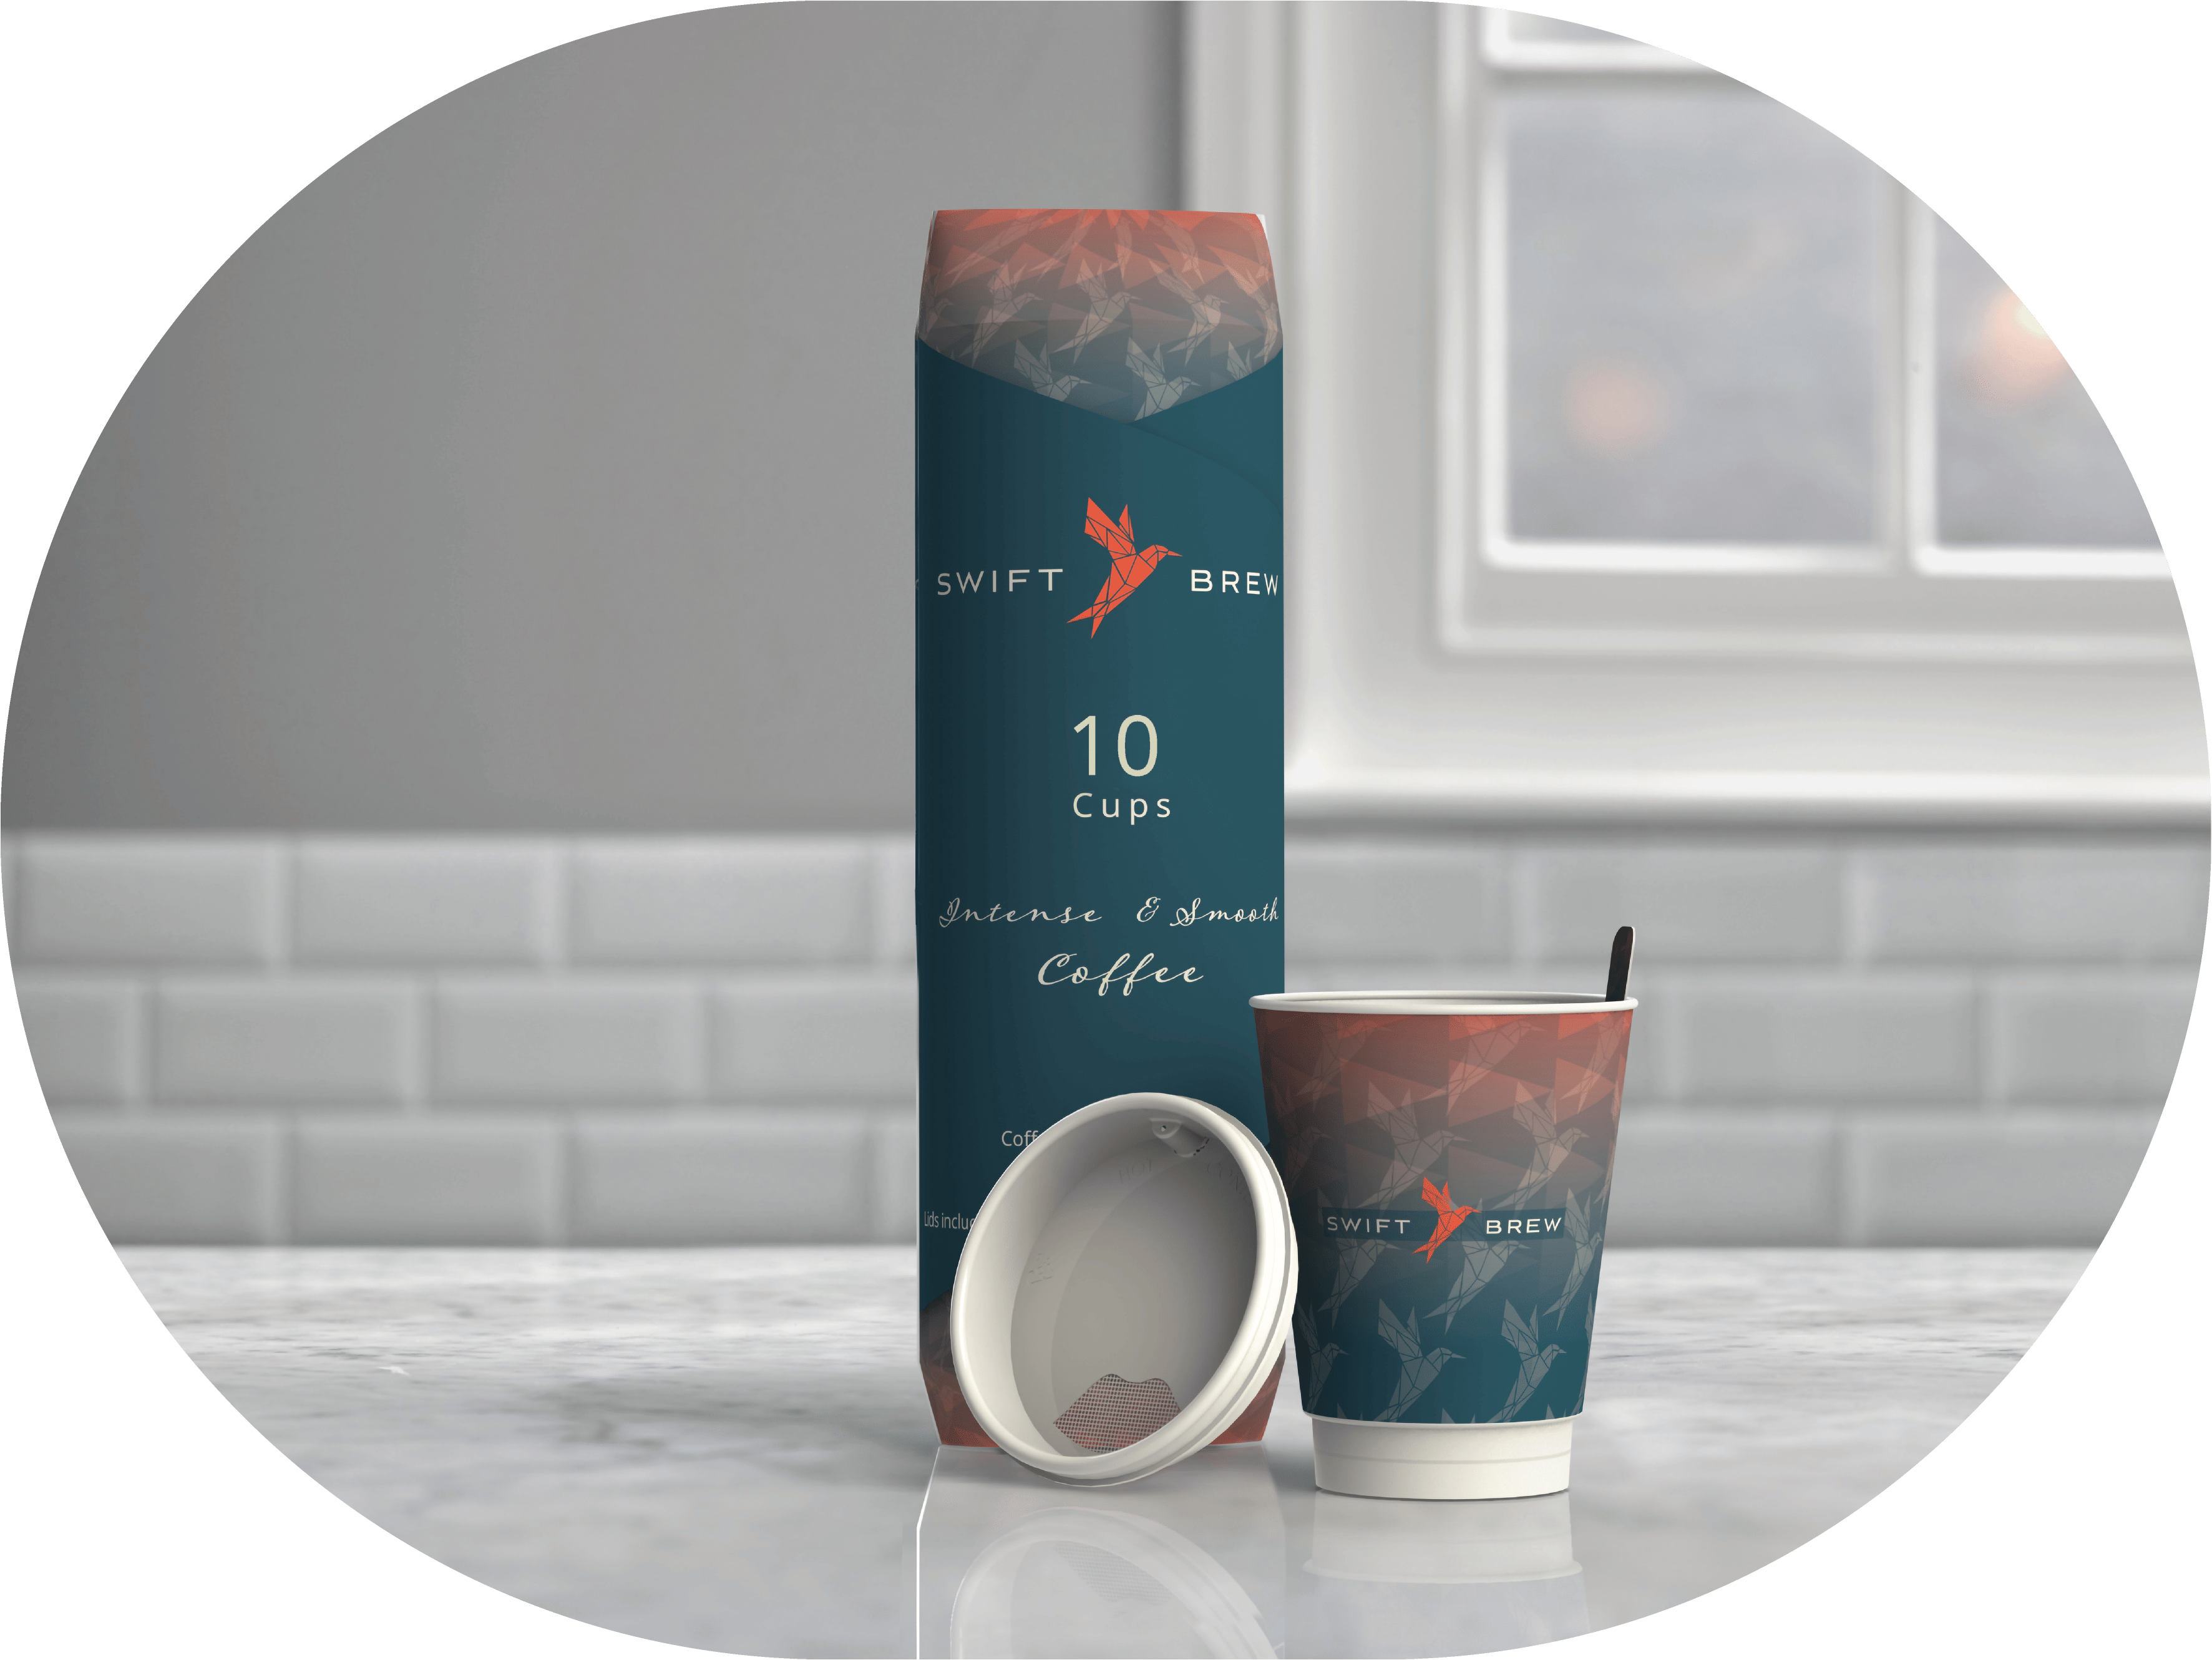 Swift Brew cup and 10 sleeve rounded